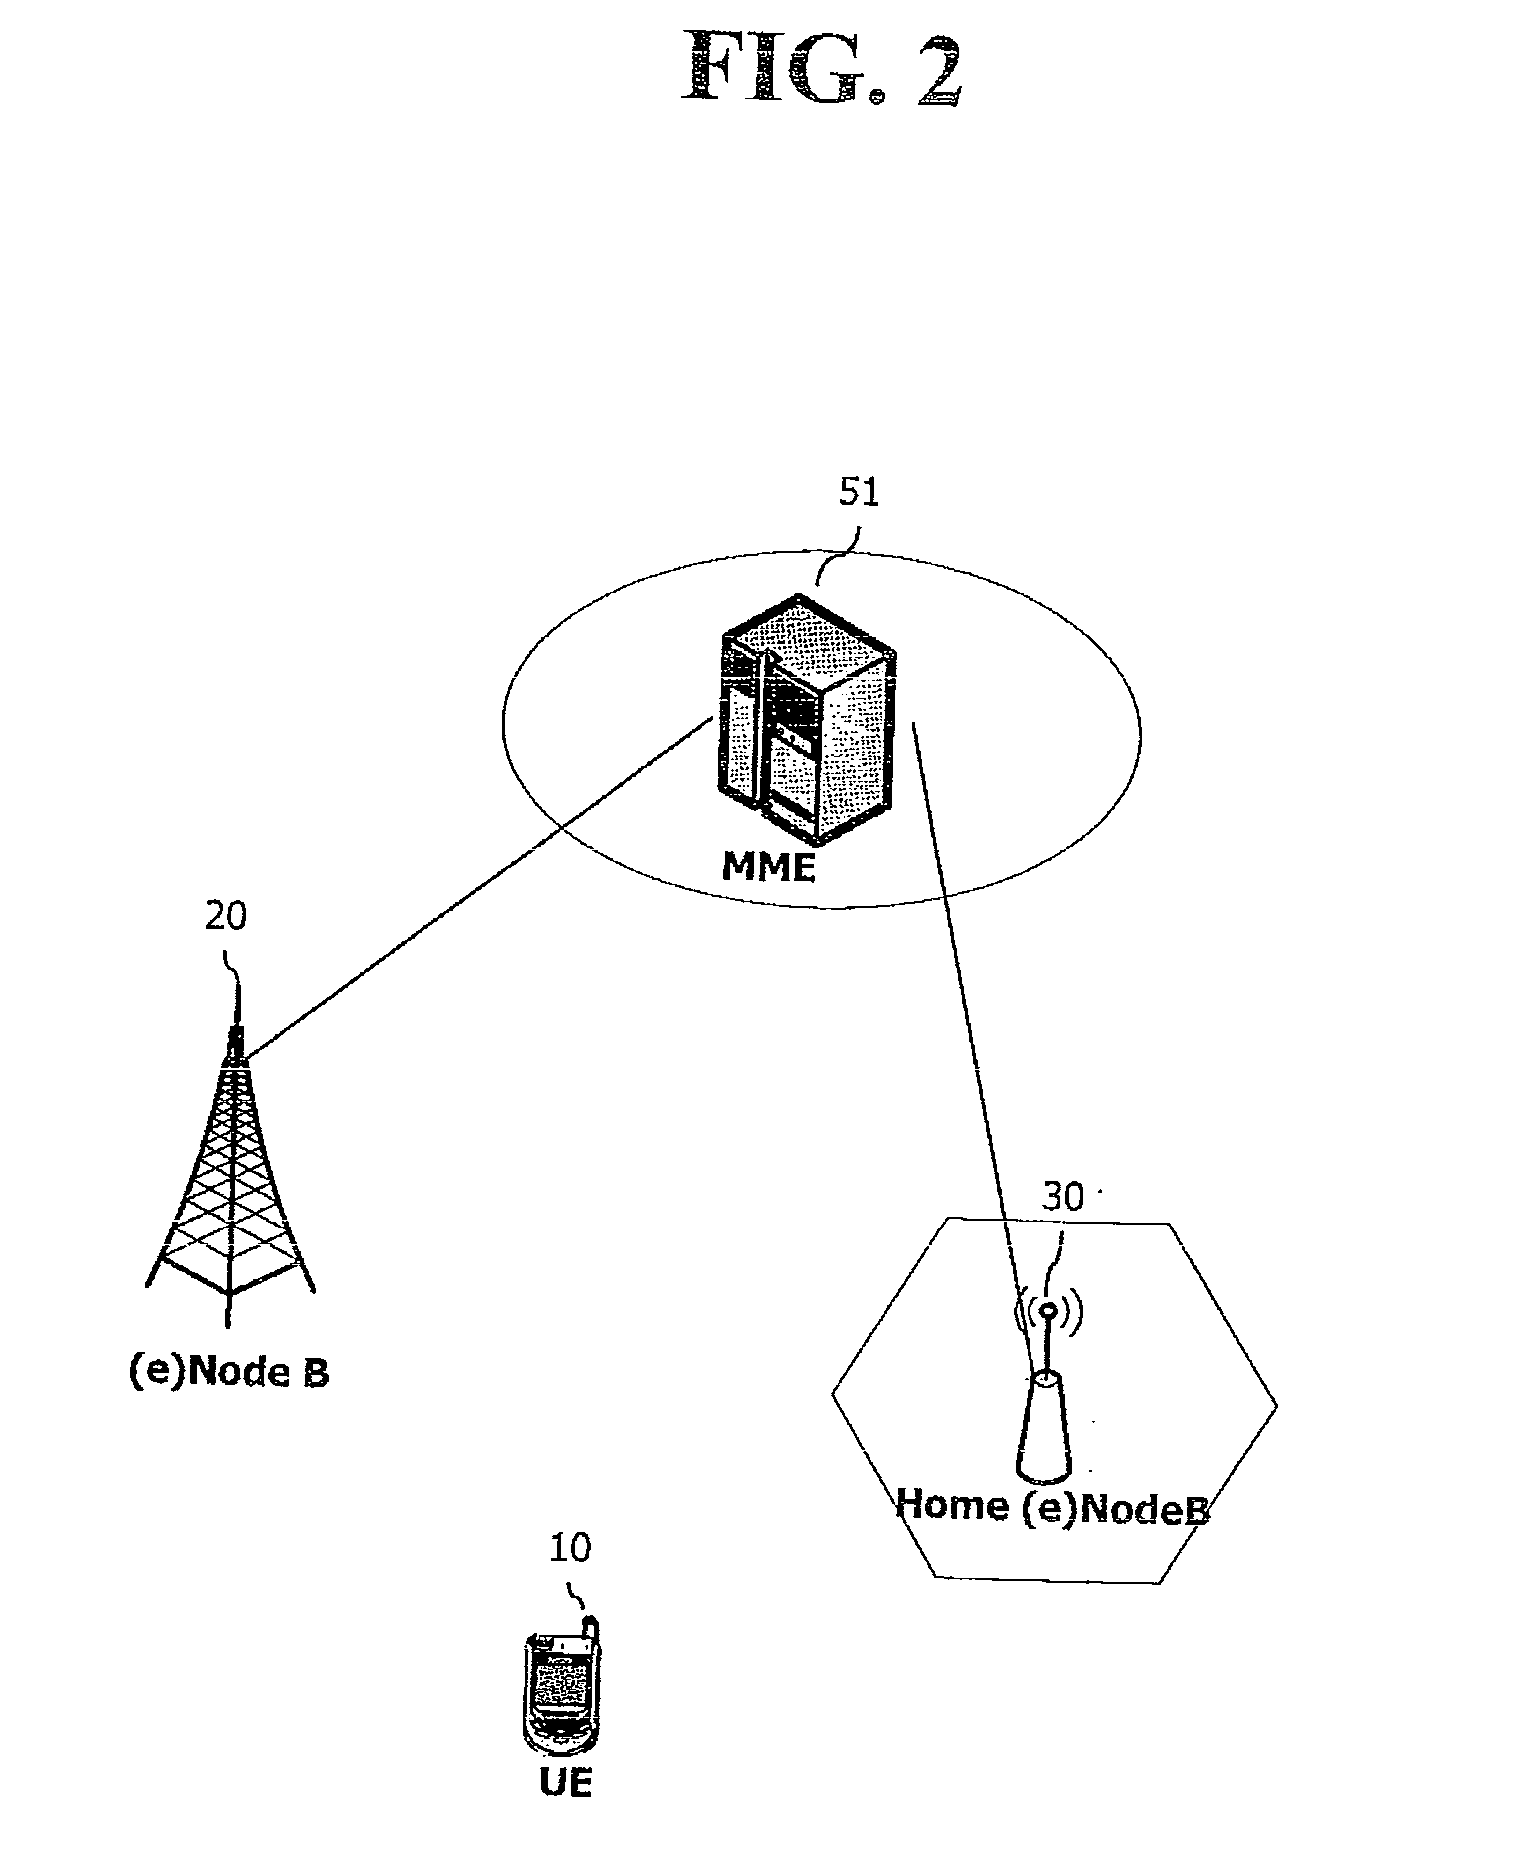 Optimized paging method for home (e)nodeb system